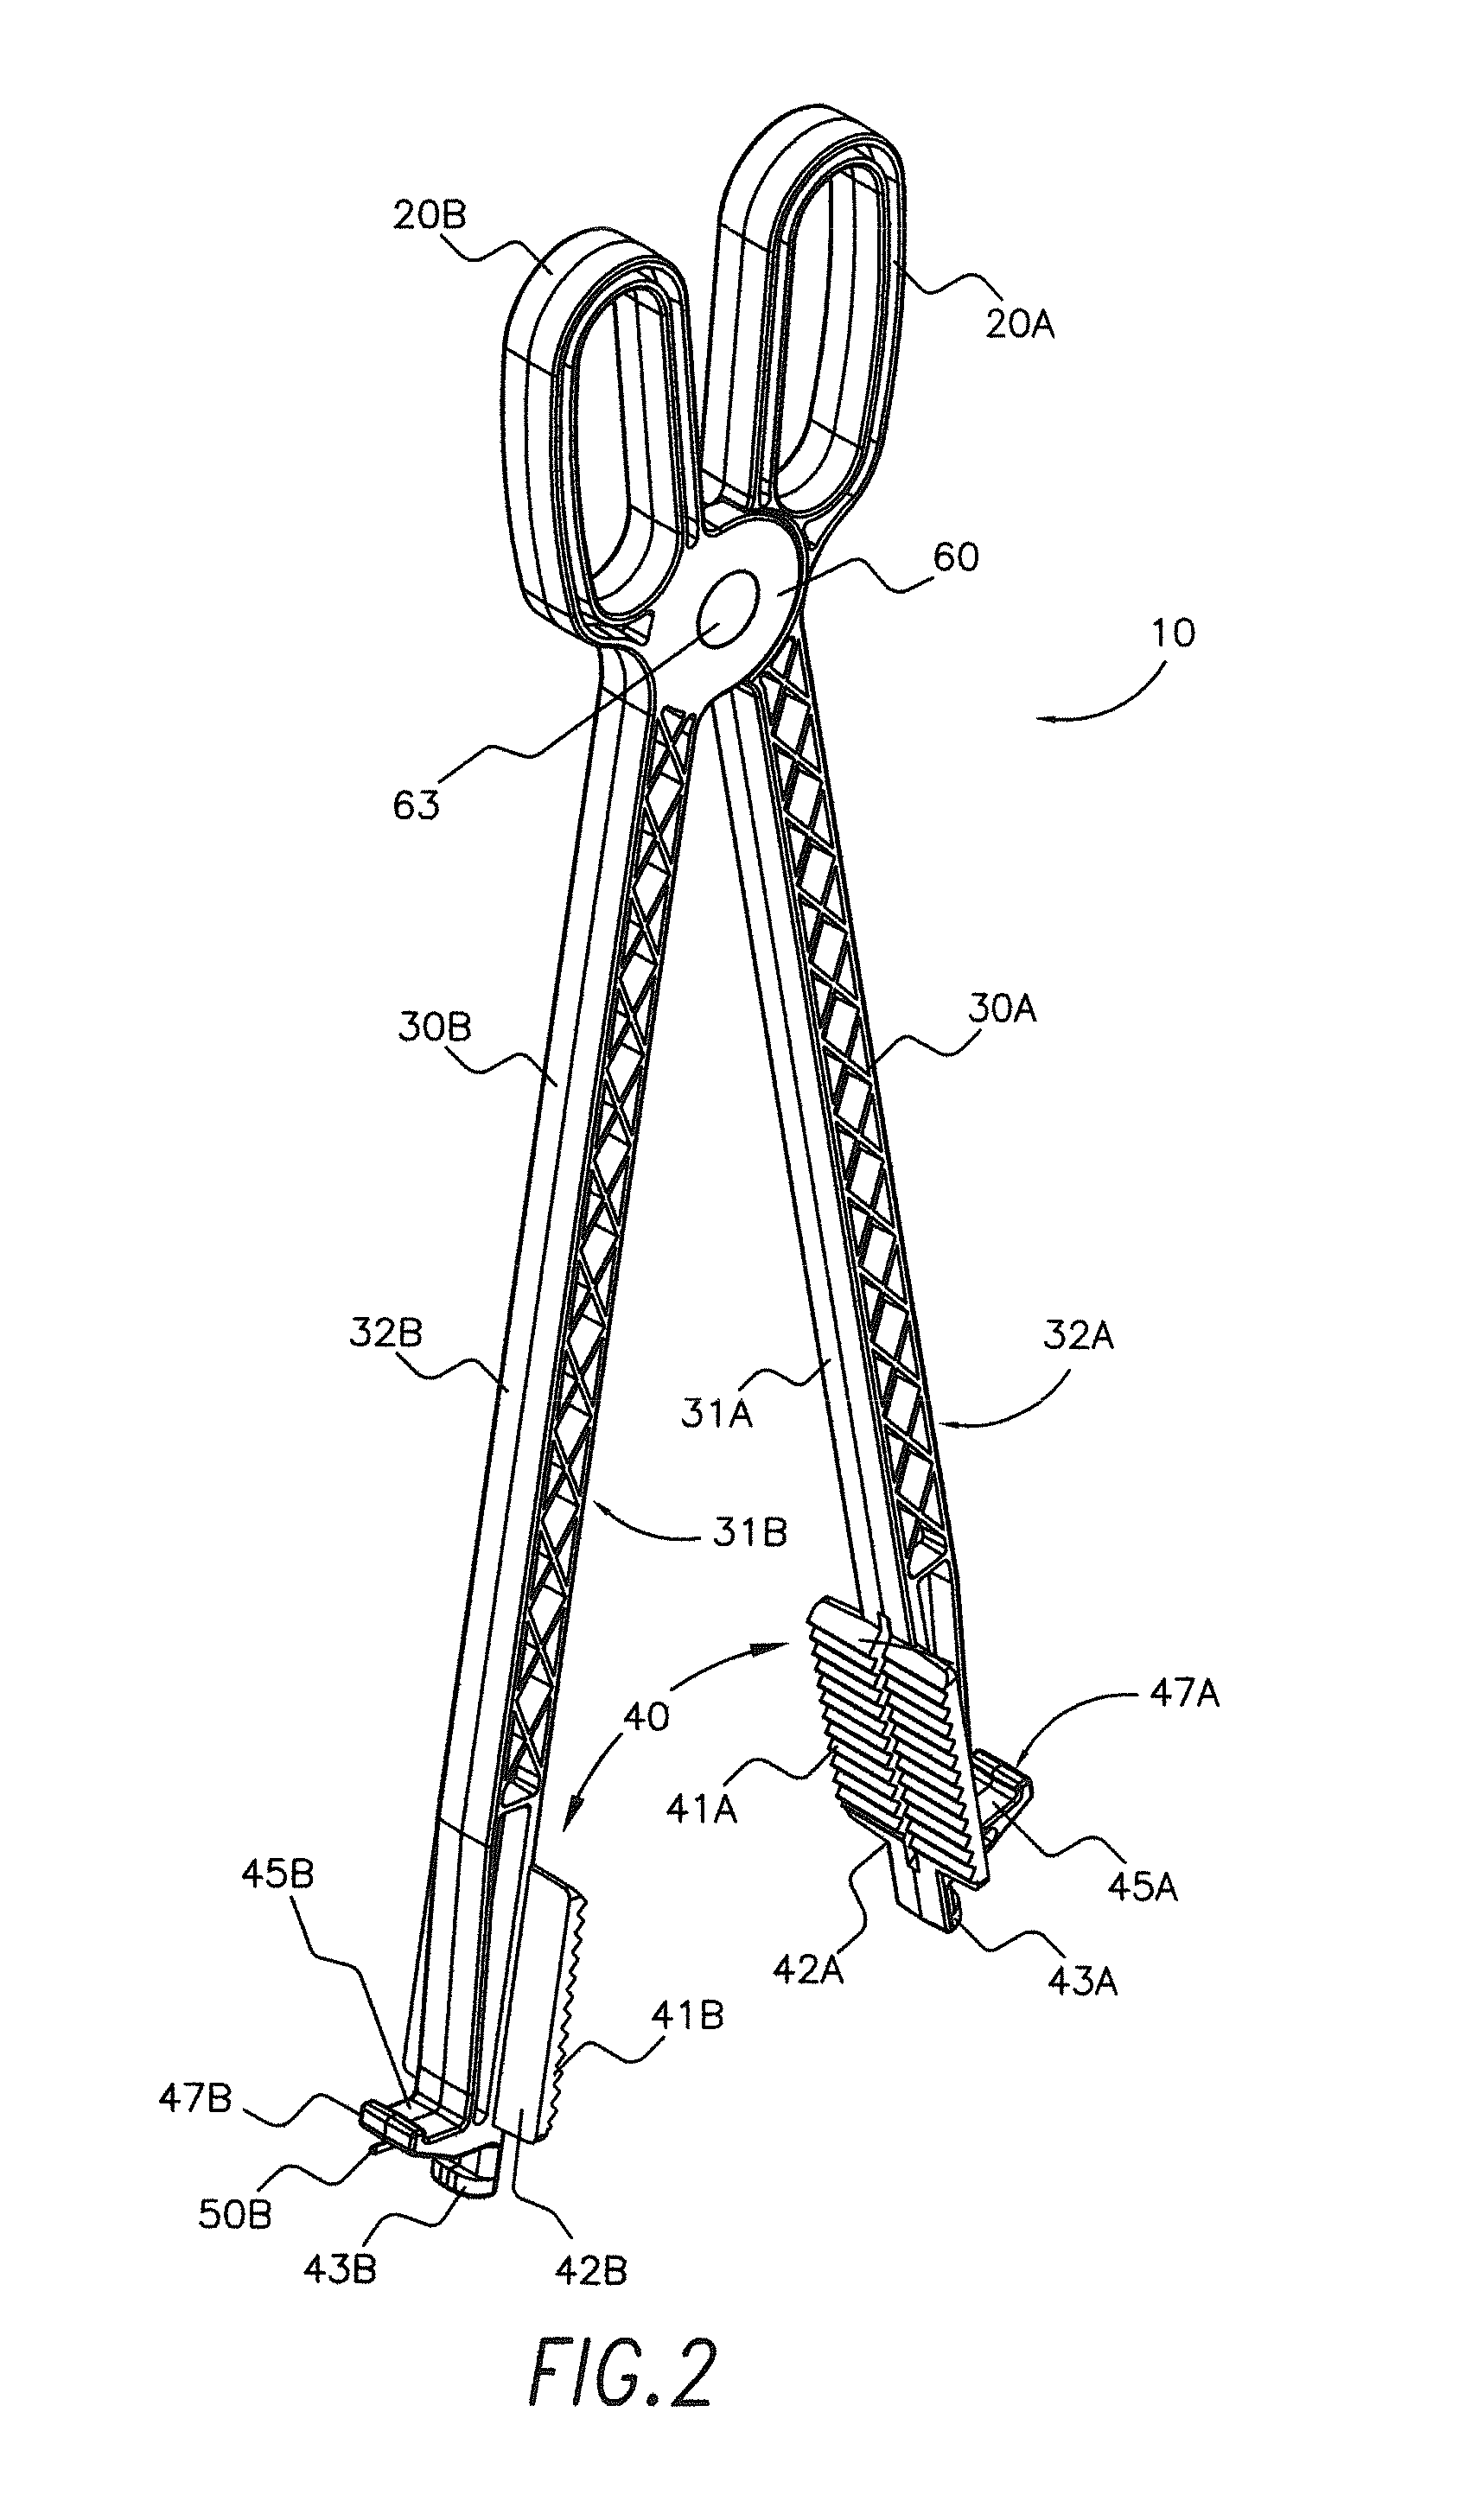 Tool for removing a swimming pool skimmer basket